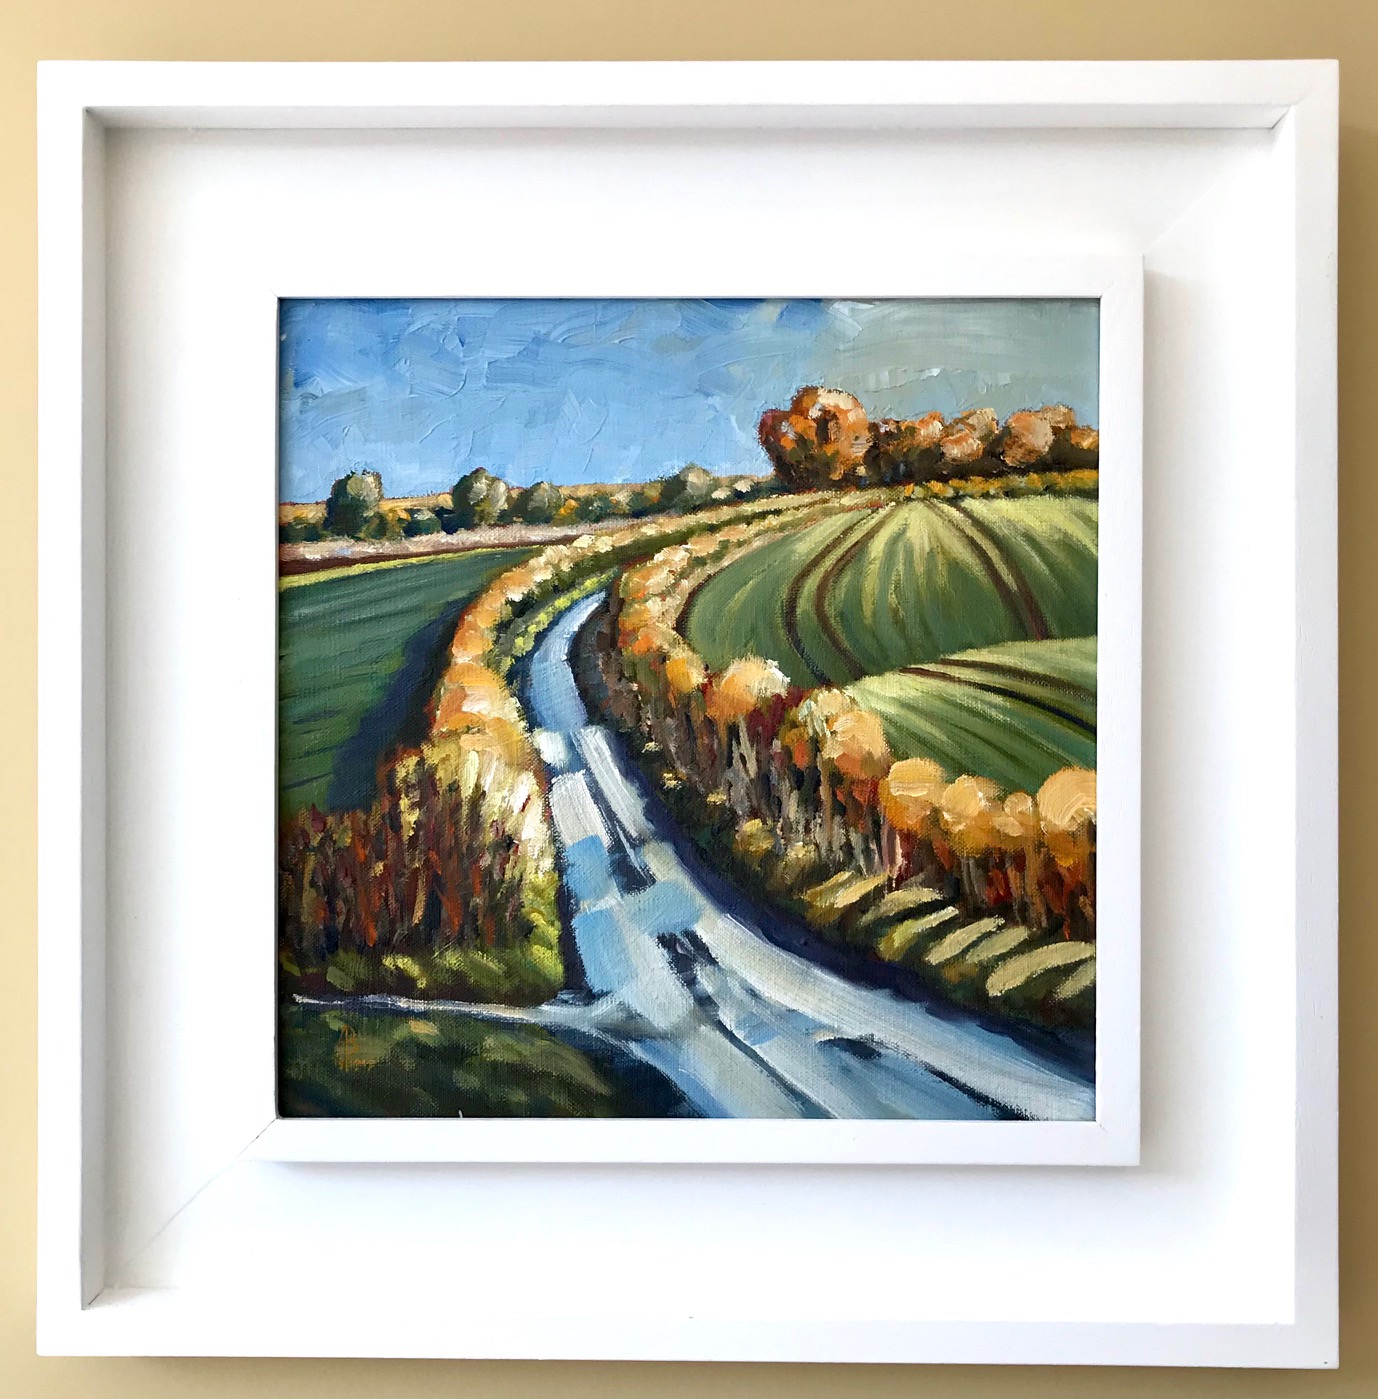 Alix Baker, "Country Road, Take Me Home", framed oil on canvas, 2019, 46 x 46cm framed. An - Image 2 of 2